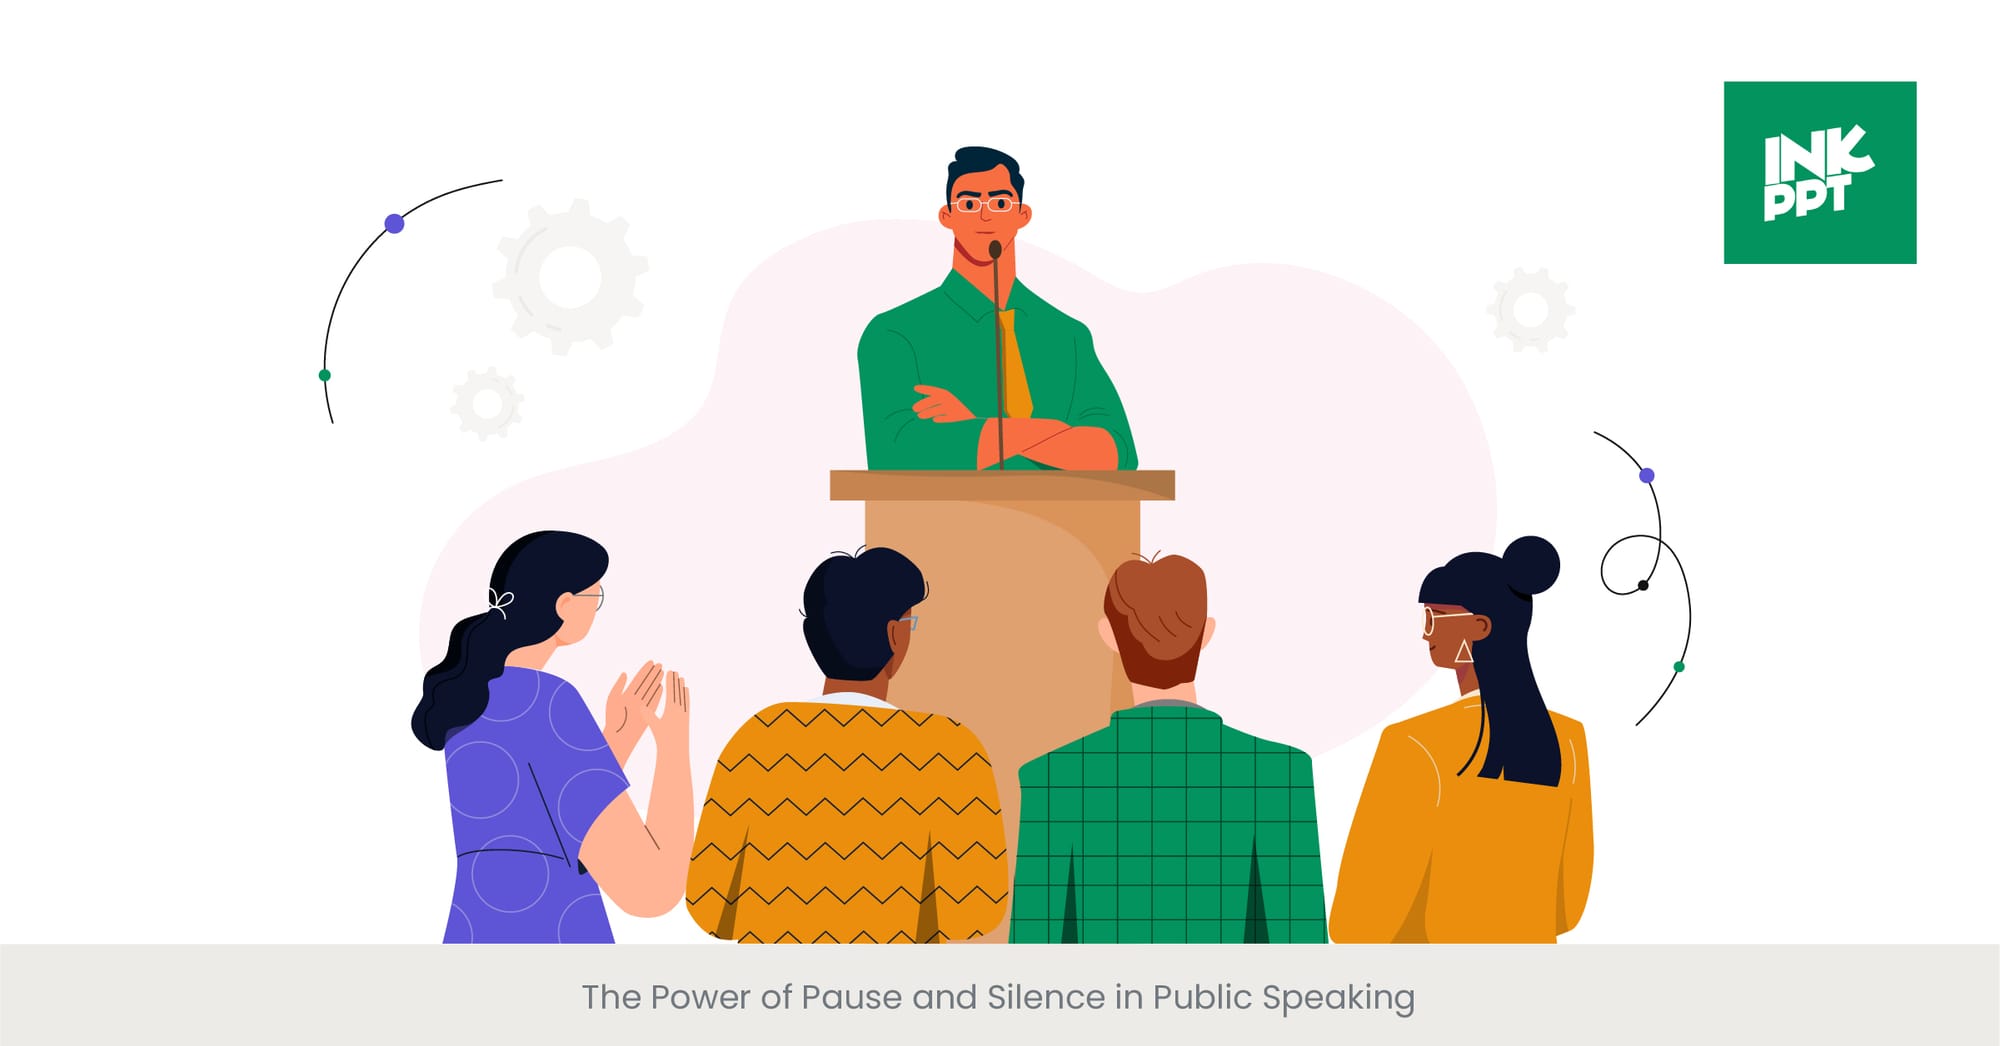 The Power of Pause and Silence in Public Speaking